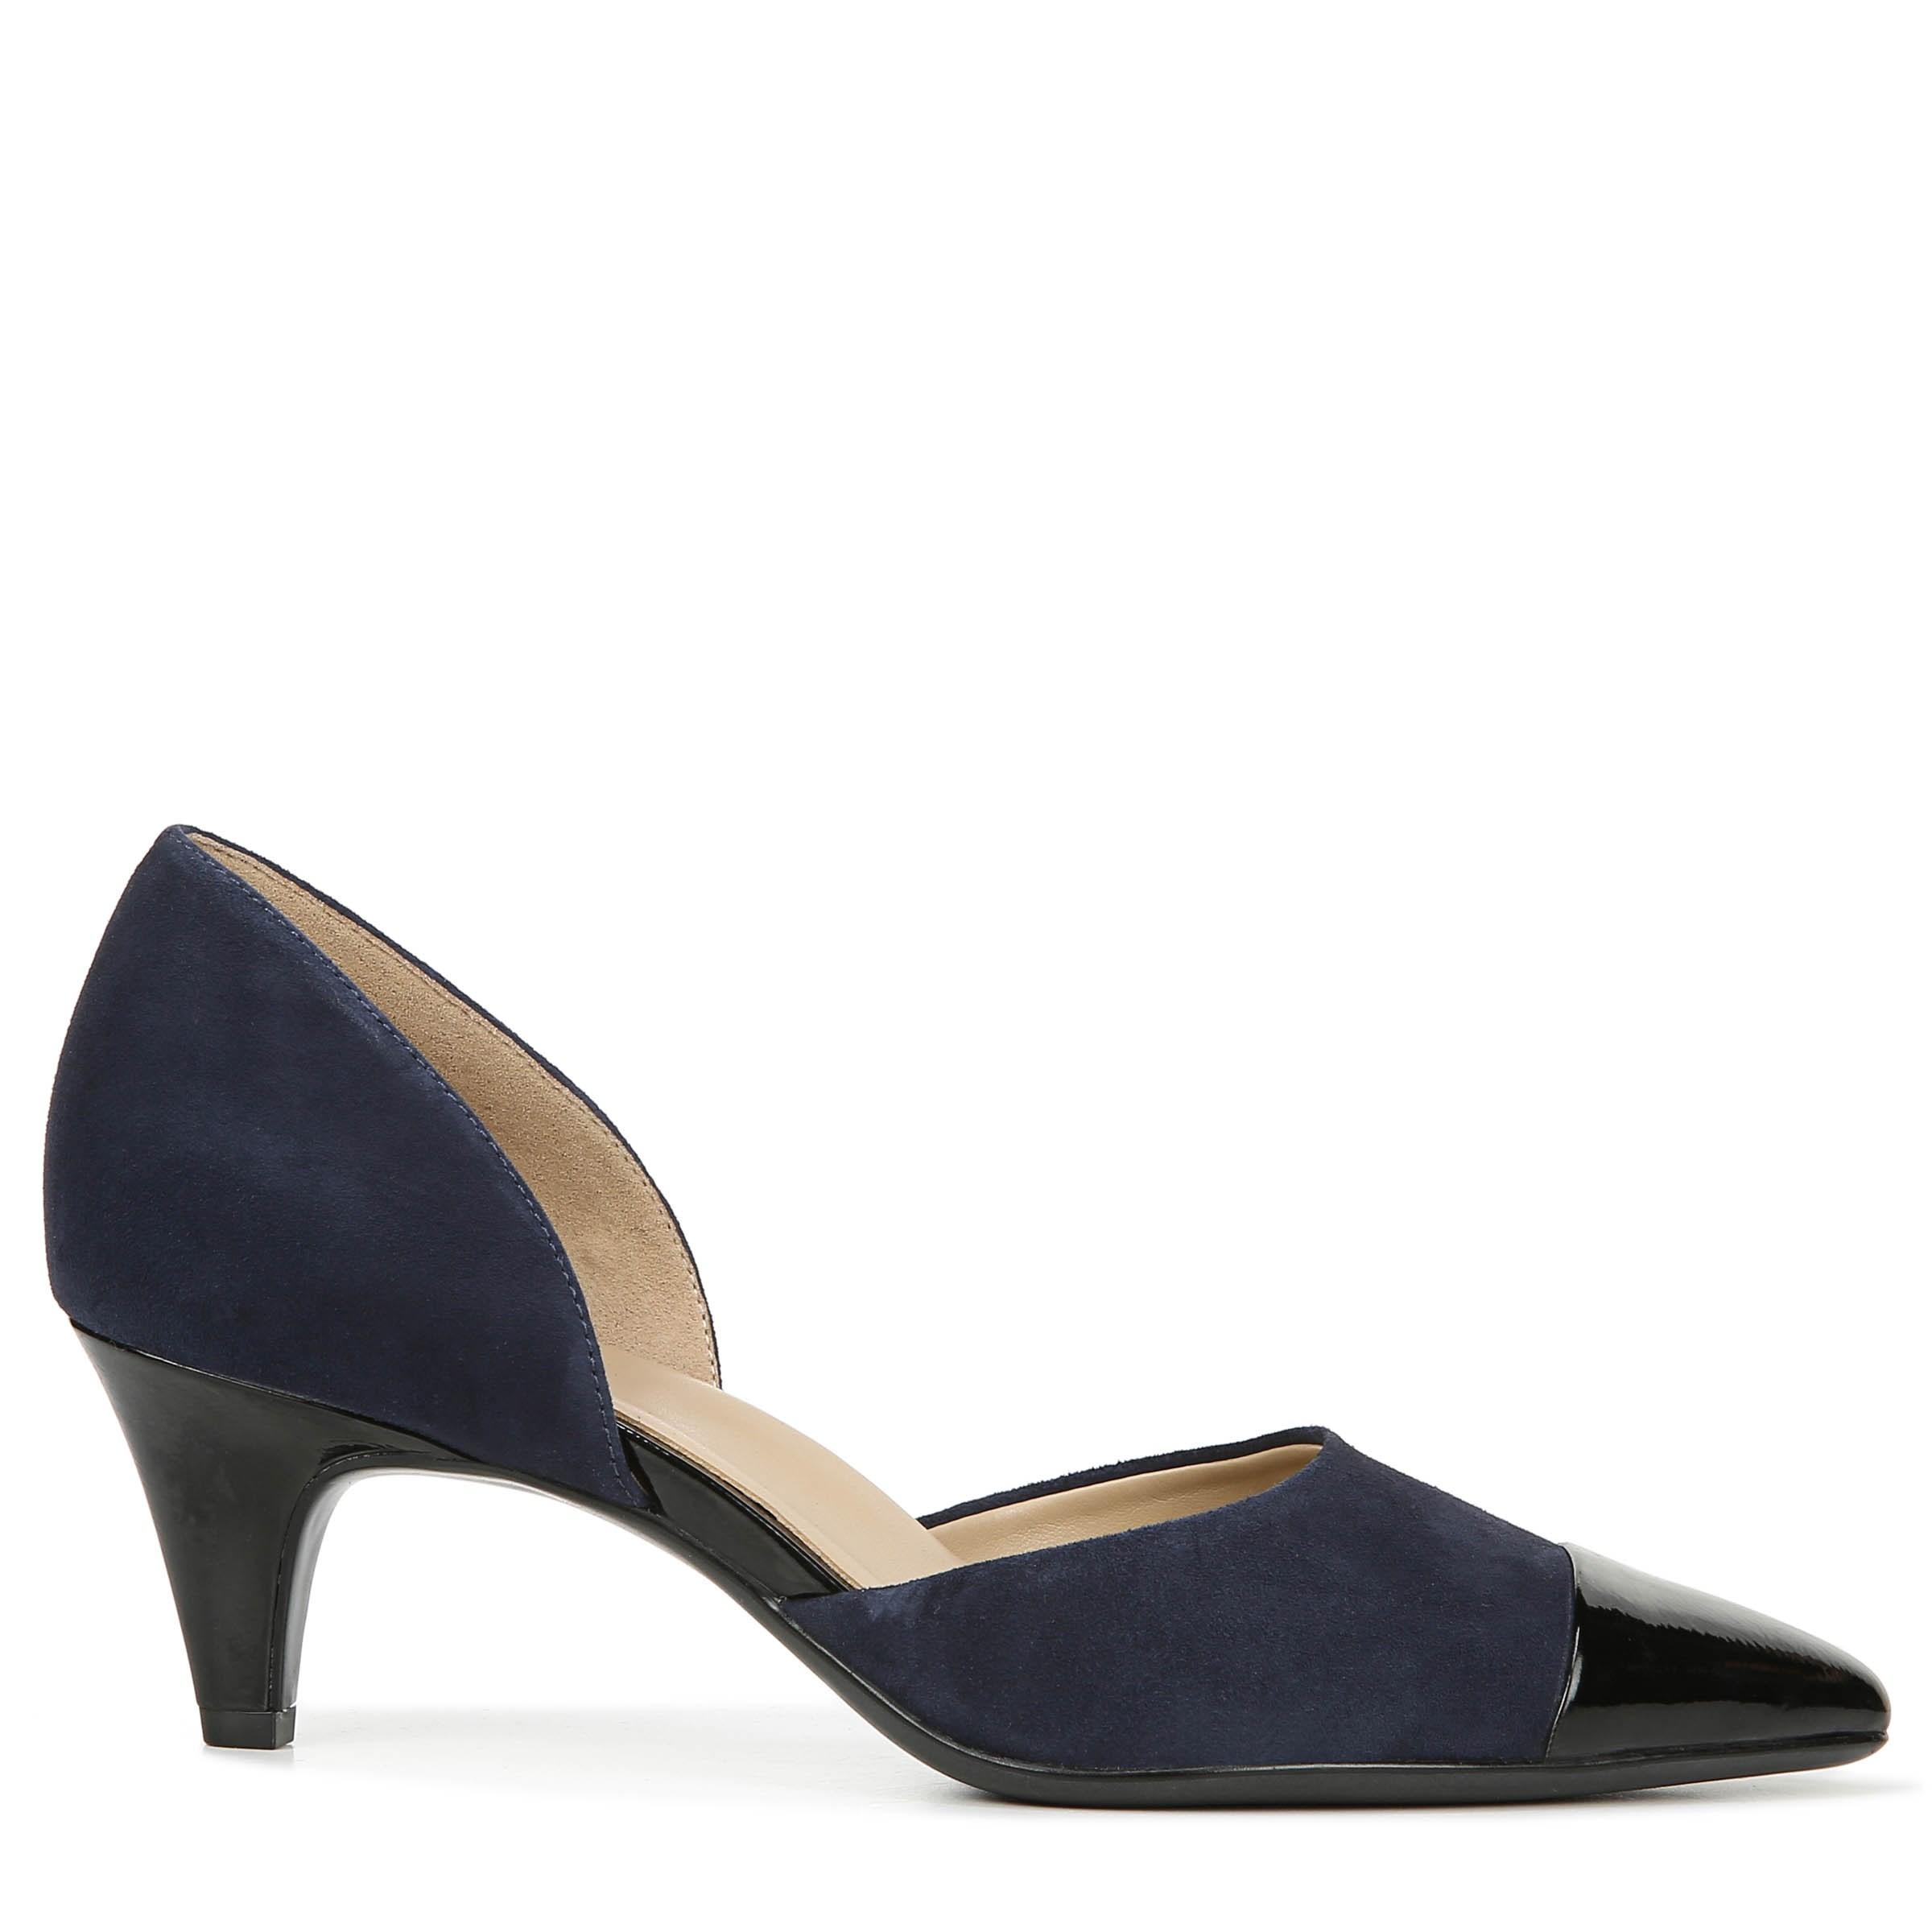 Naturalizer Leather Barb Narrow/medium/wide Pump Shoes in Blue - Lyst